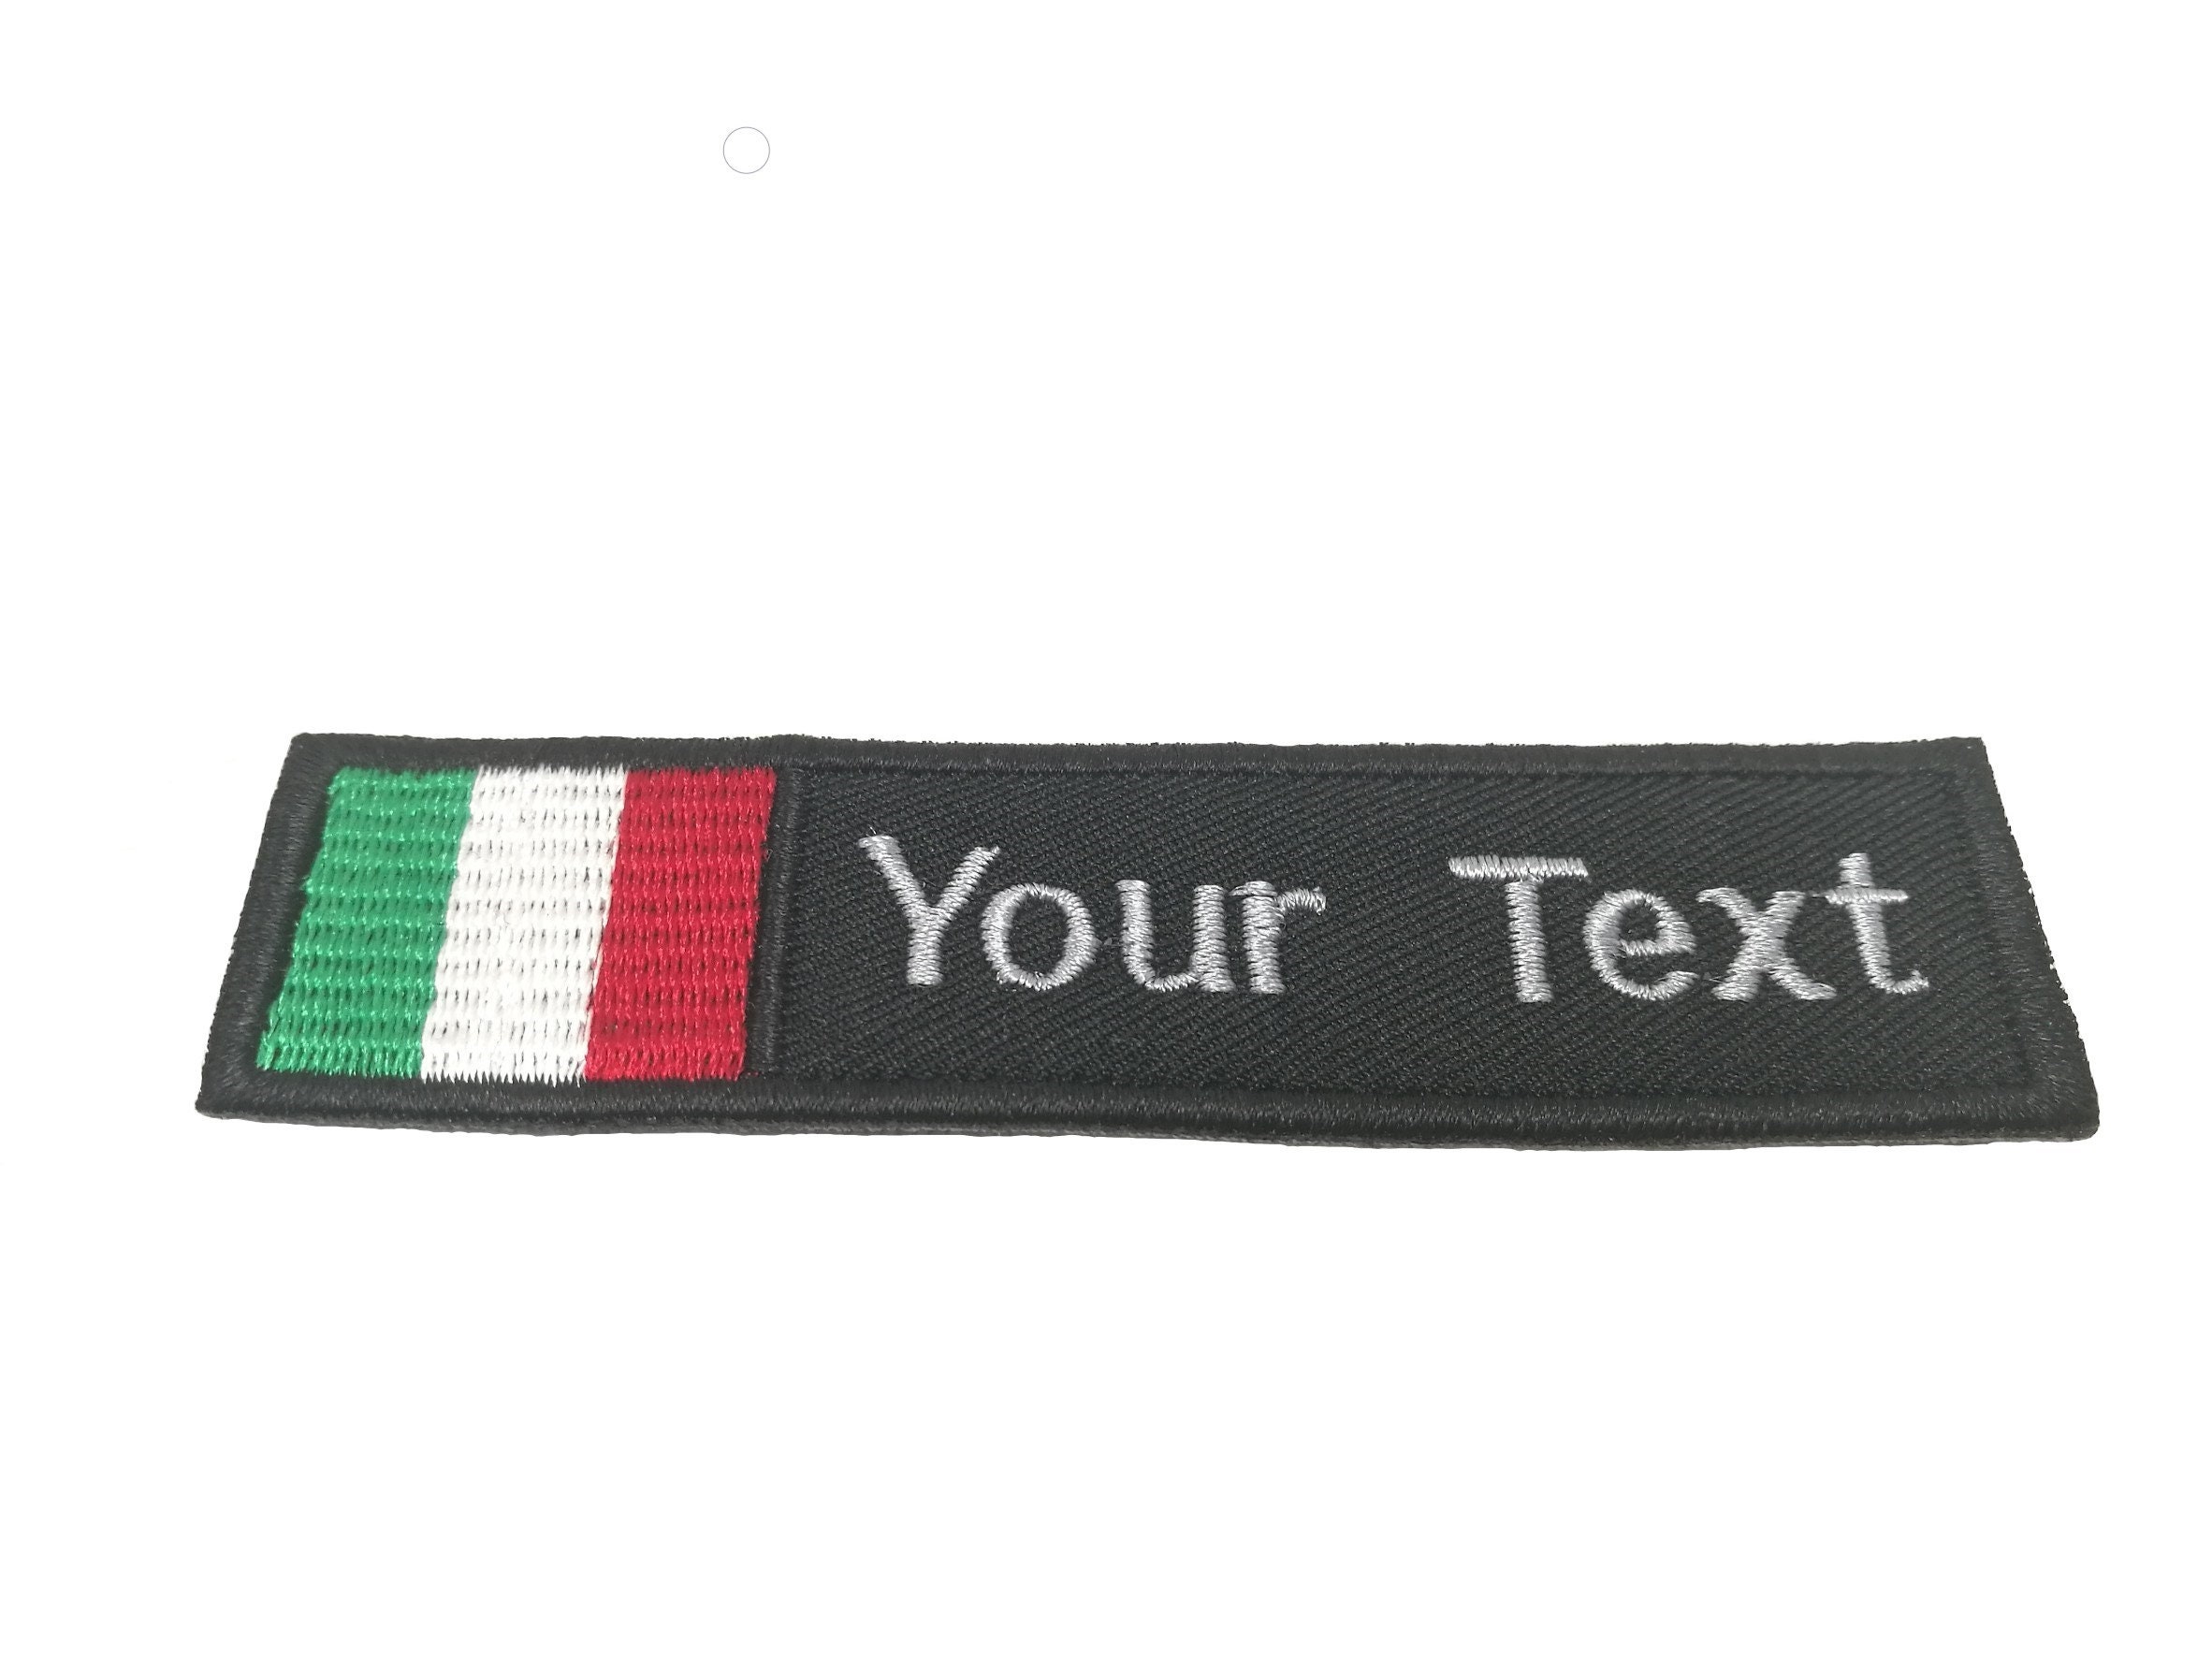 Italy Italian Army Nation Country Flag Velcro Patch for $2.09